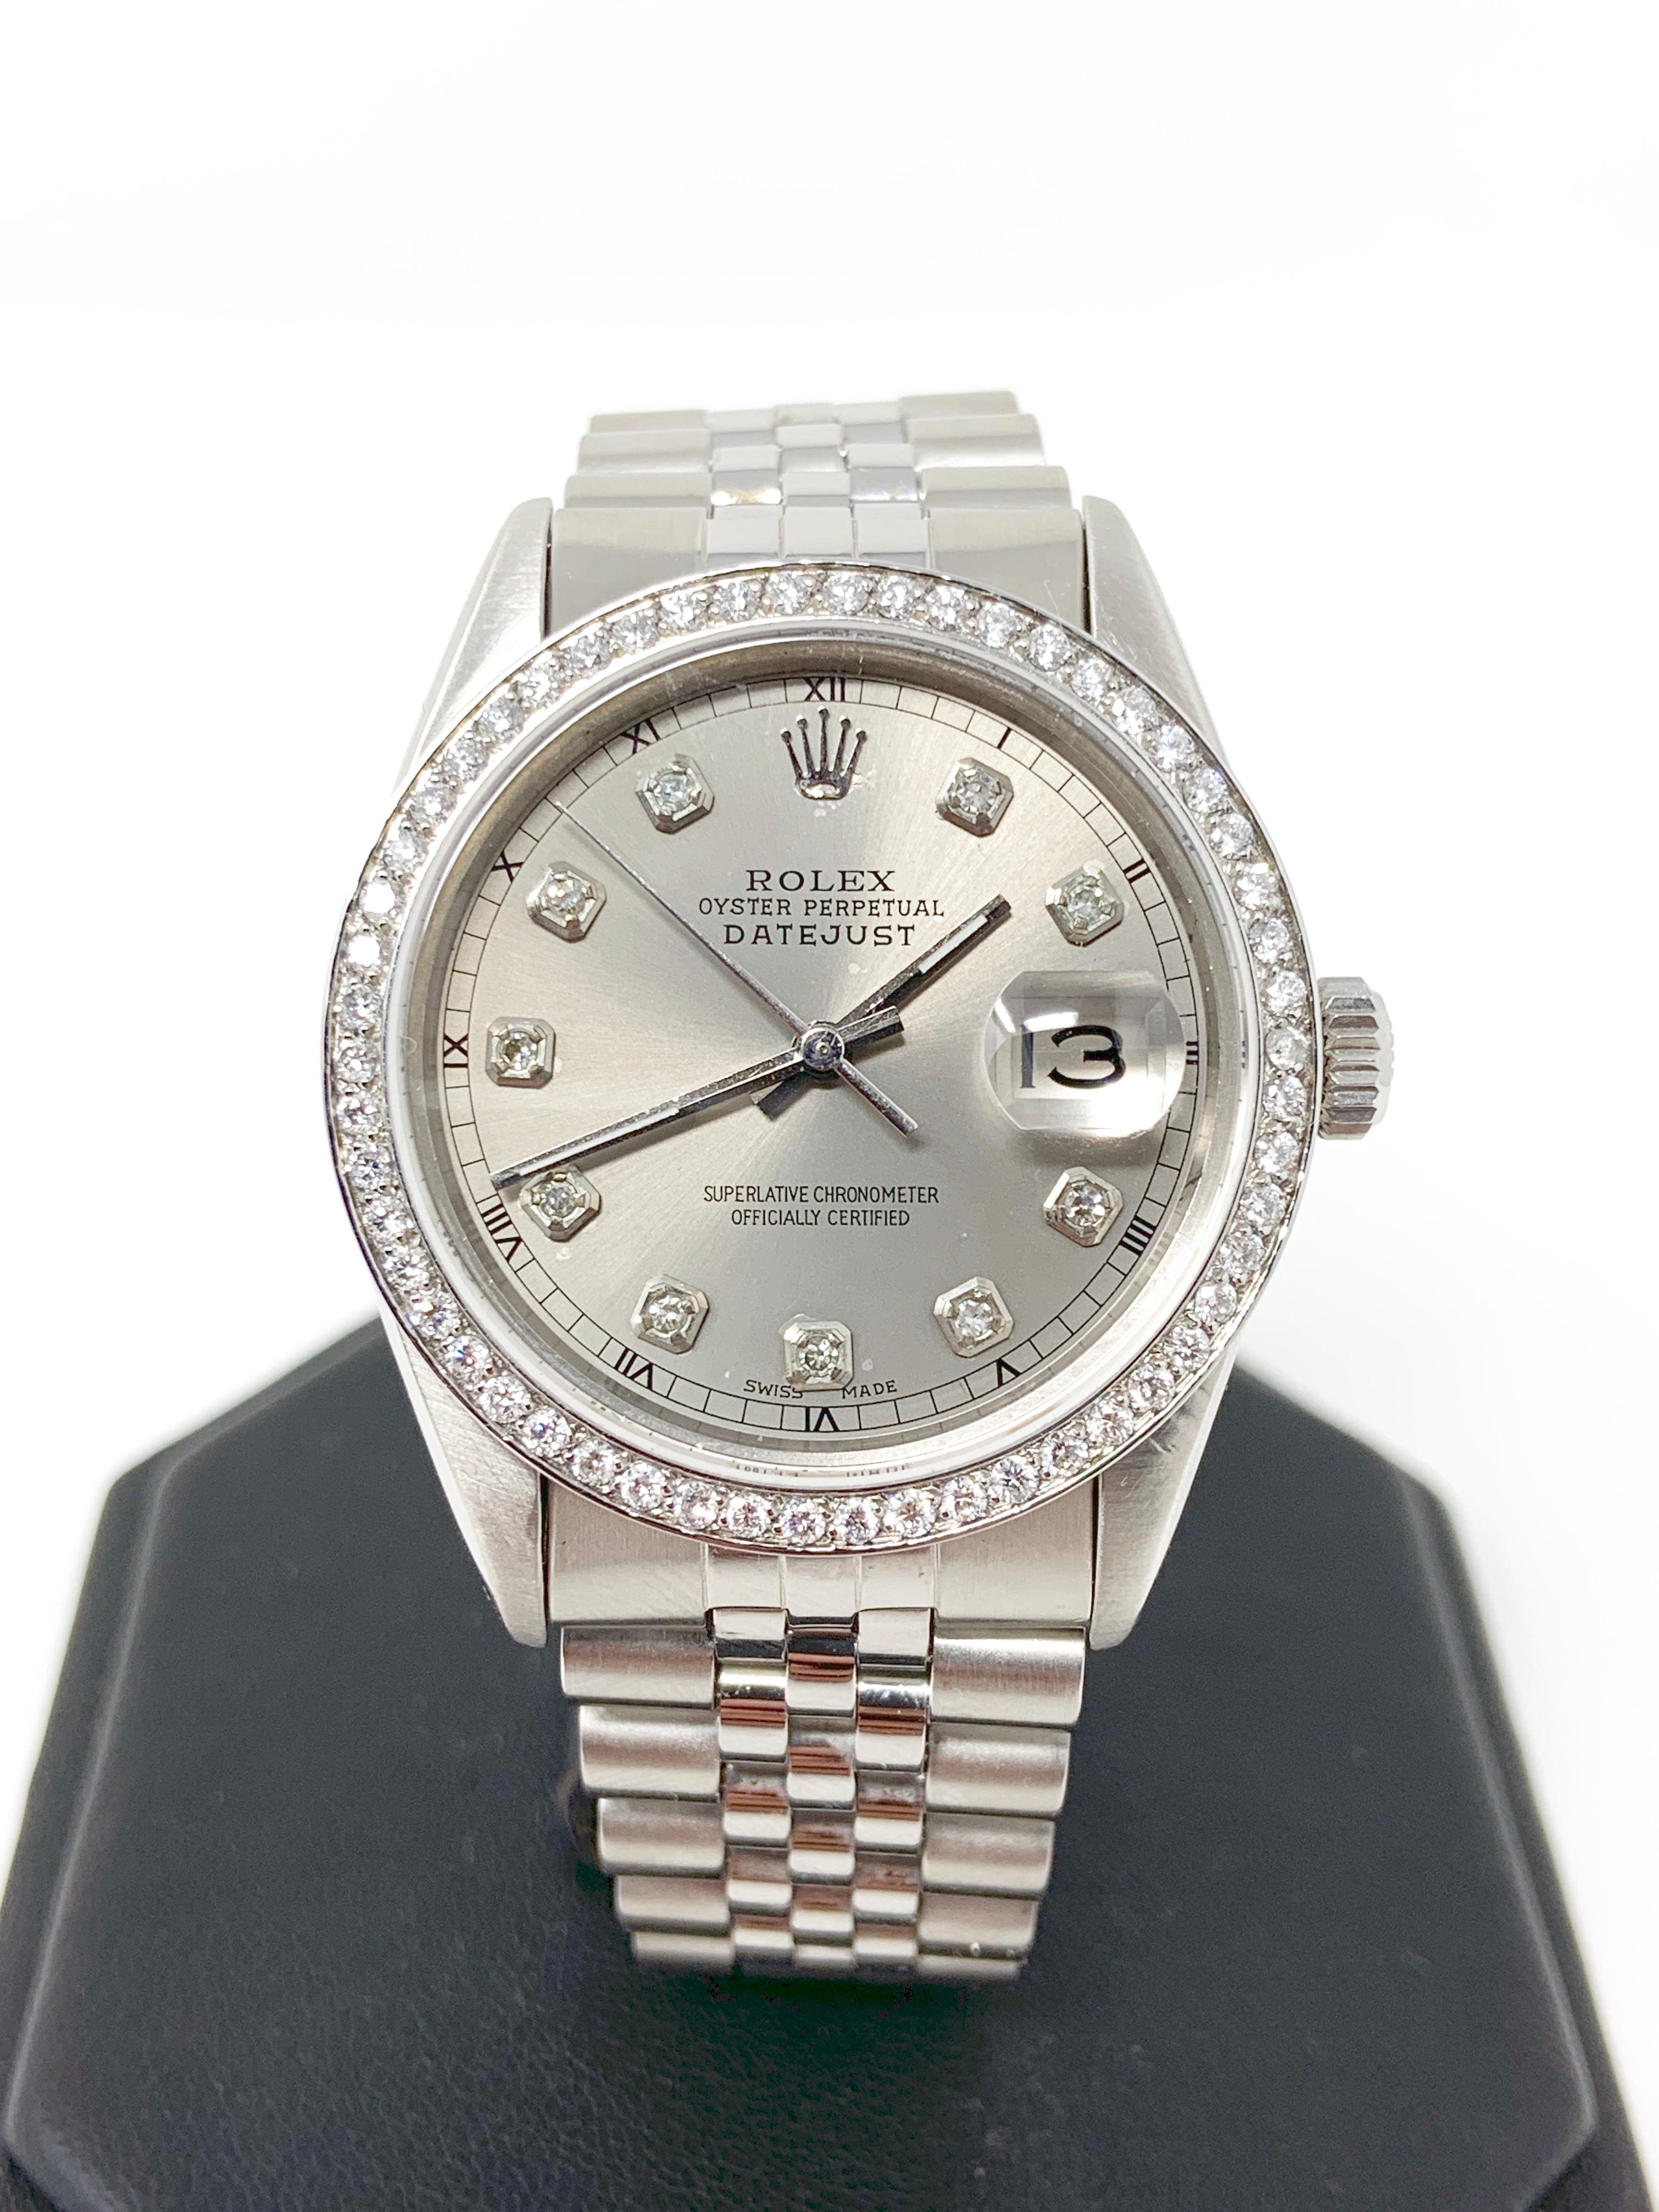 Gender - mens
Model - 16030 datejust
Condition - pre owned
Metals - Stainless steel
Case size - 36 mm
Bezel - stainless steel diamond
Crystal - sapphire
Movement - automatic caliber 3035
Dial - Refinished gray diamond
Wrist band - steel